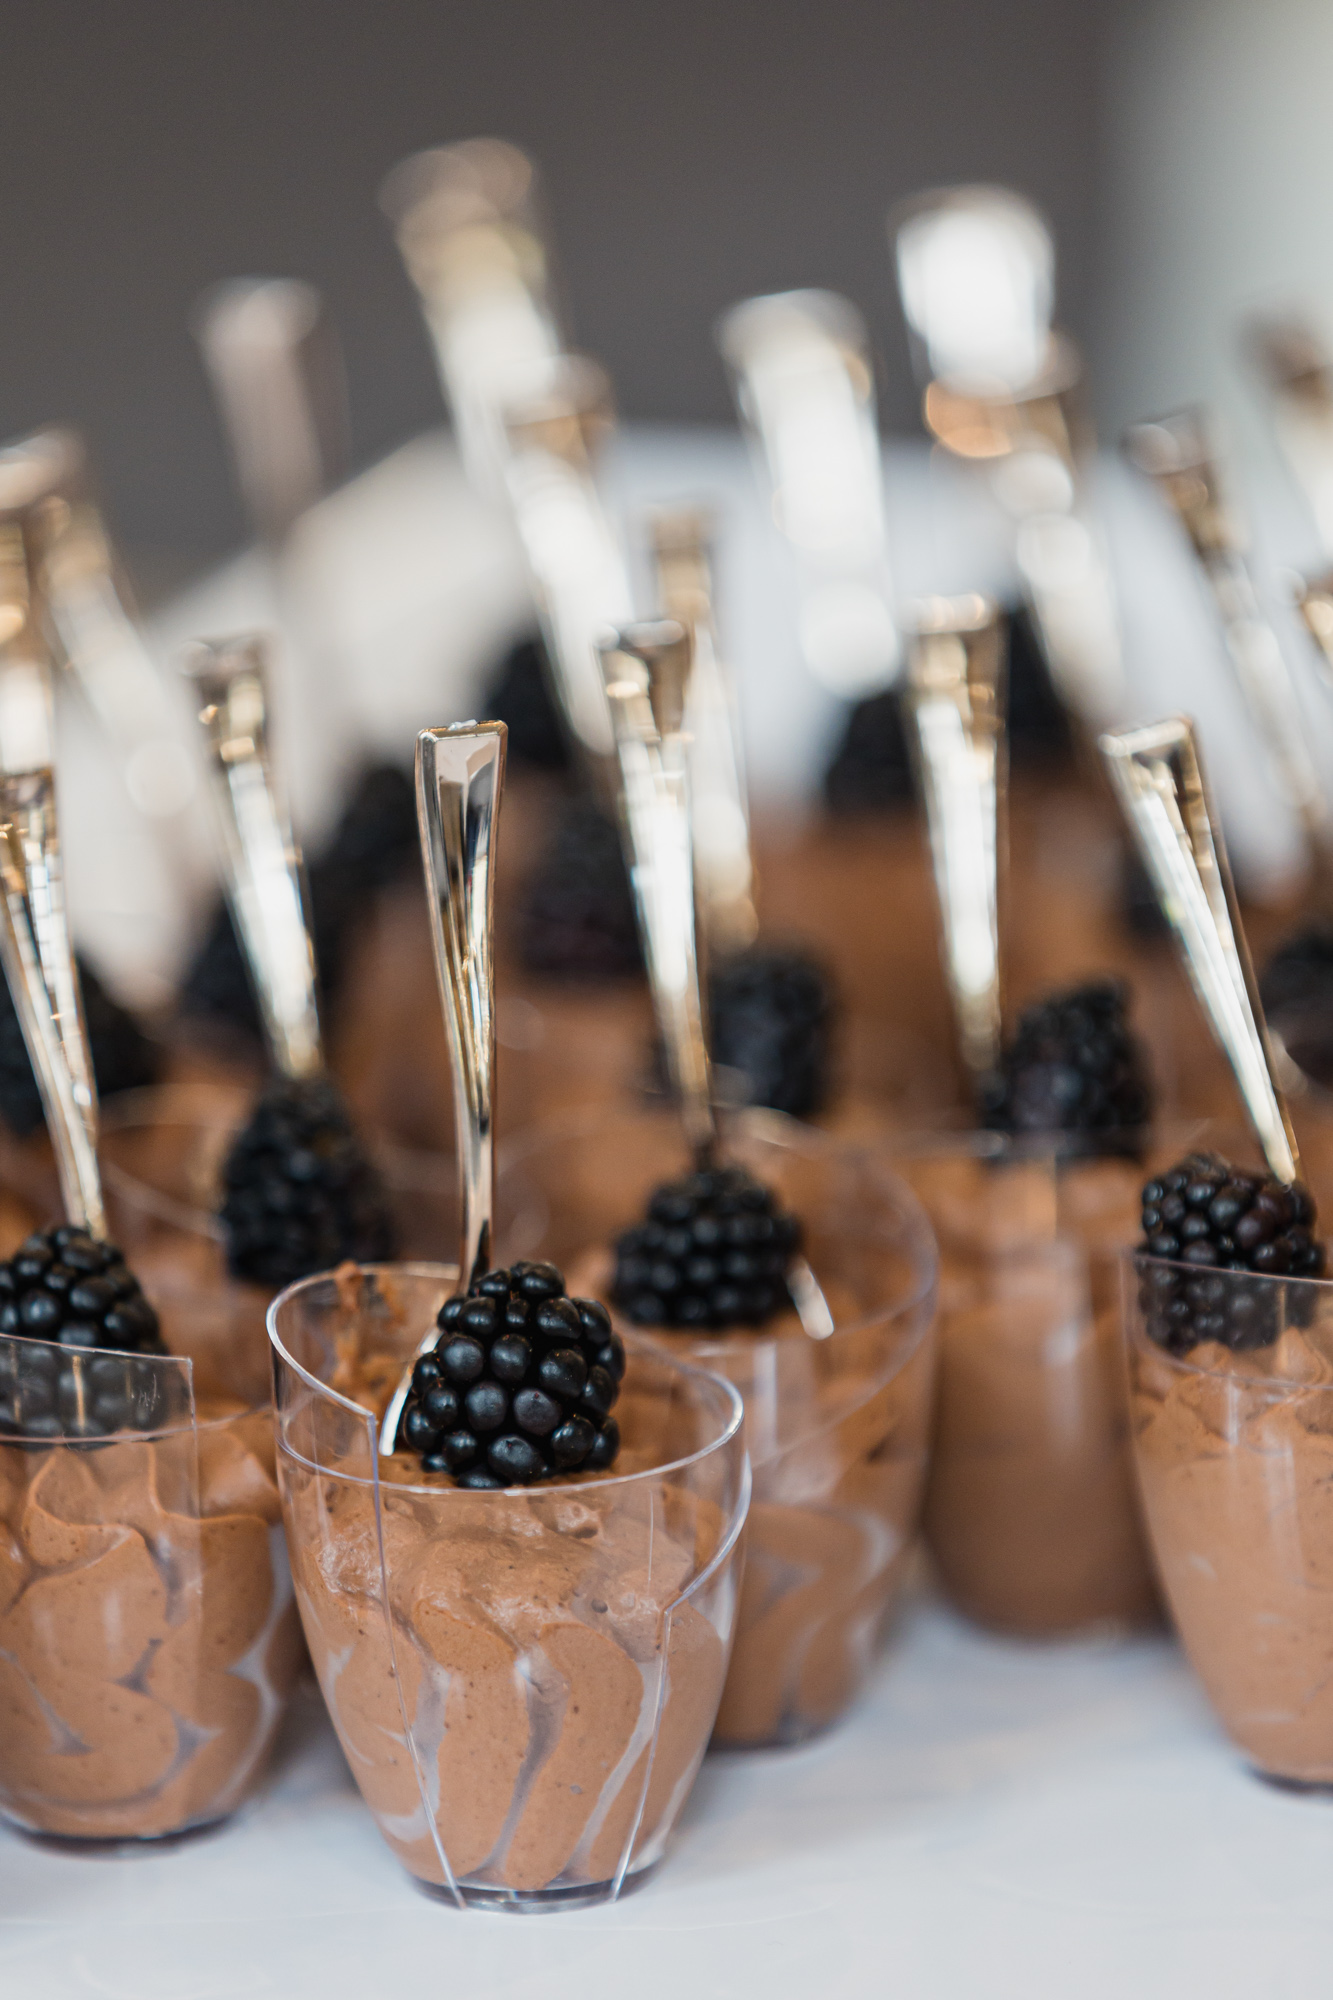 Dessert, an option for food service for your event